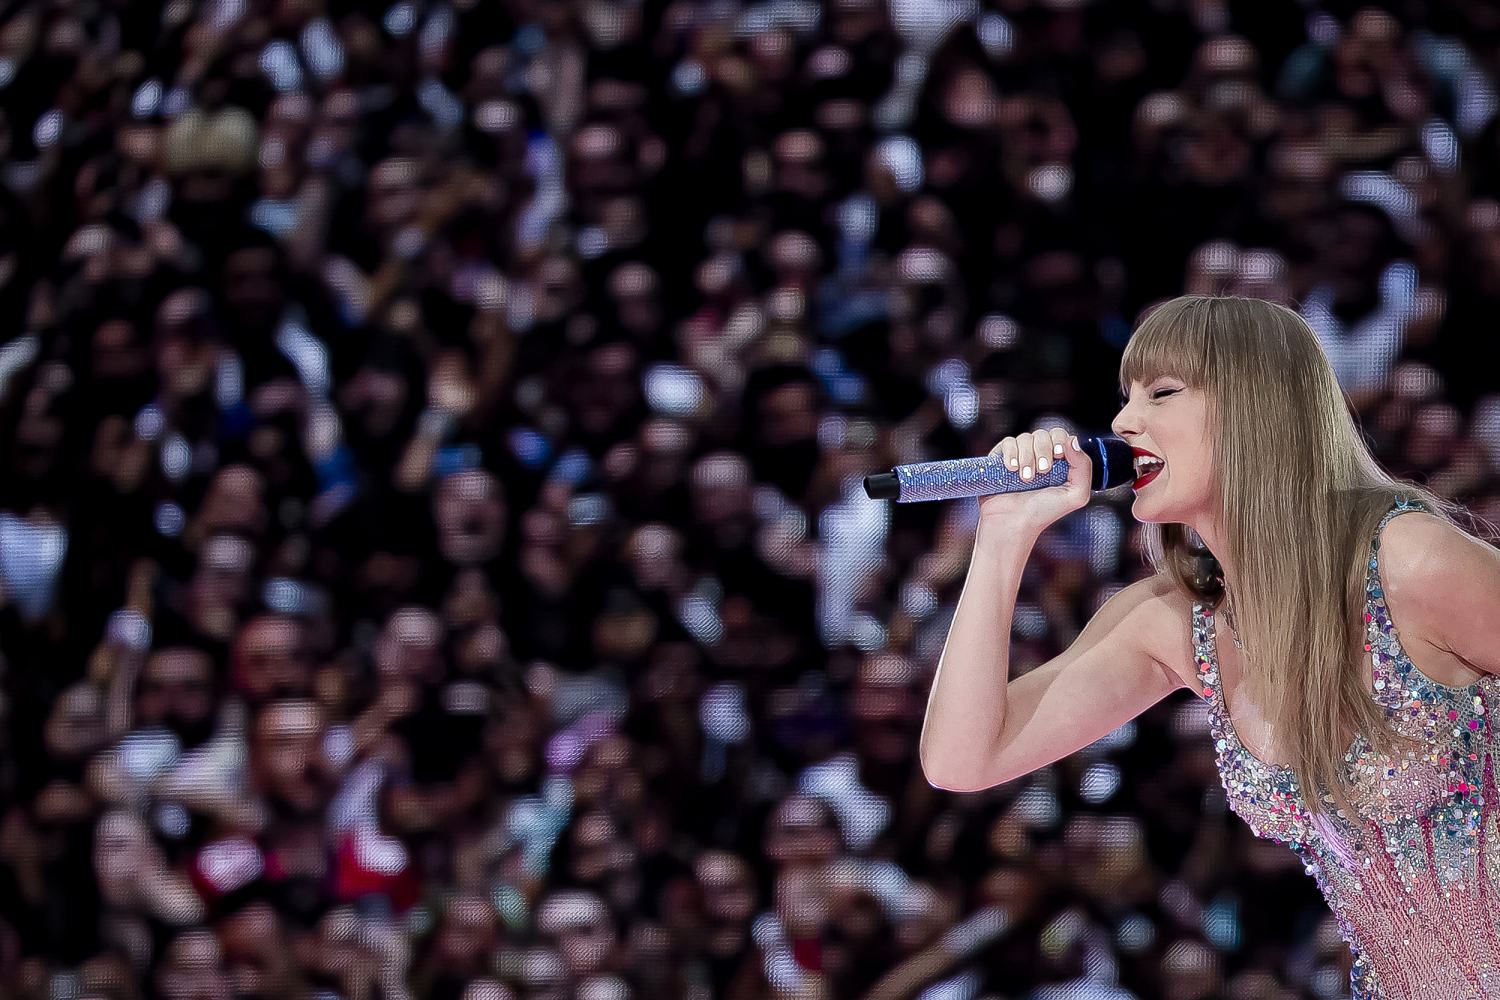 A growing number of Swifties are calling on Taylor Swift to break her silence on Gaza